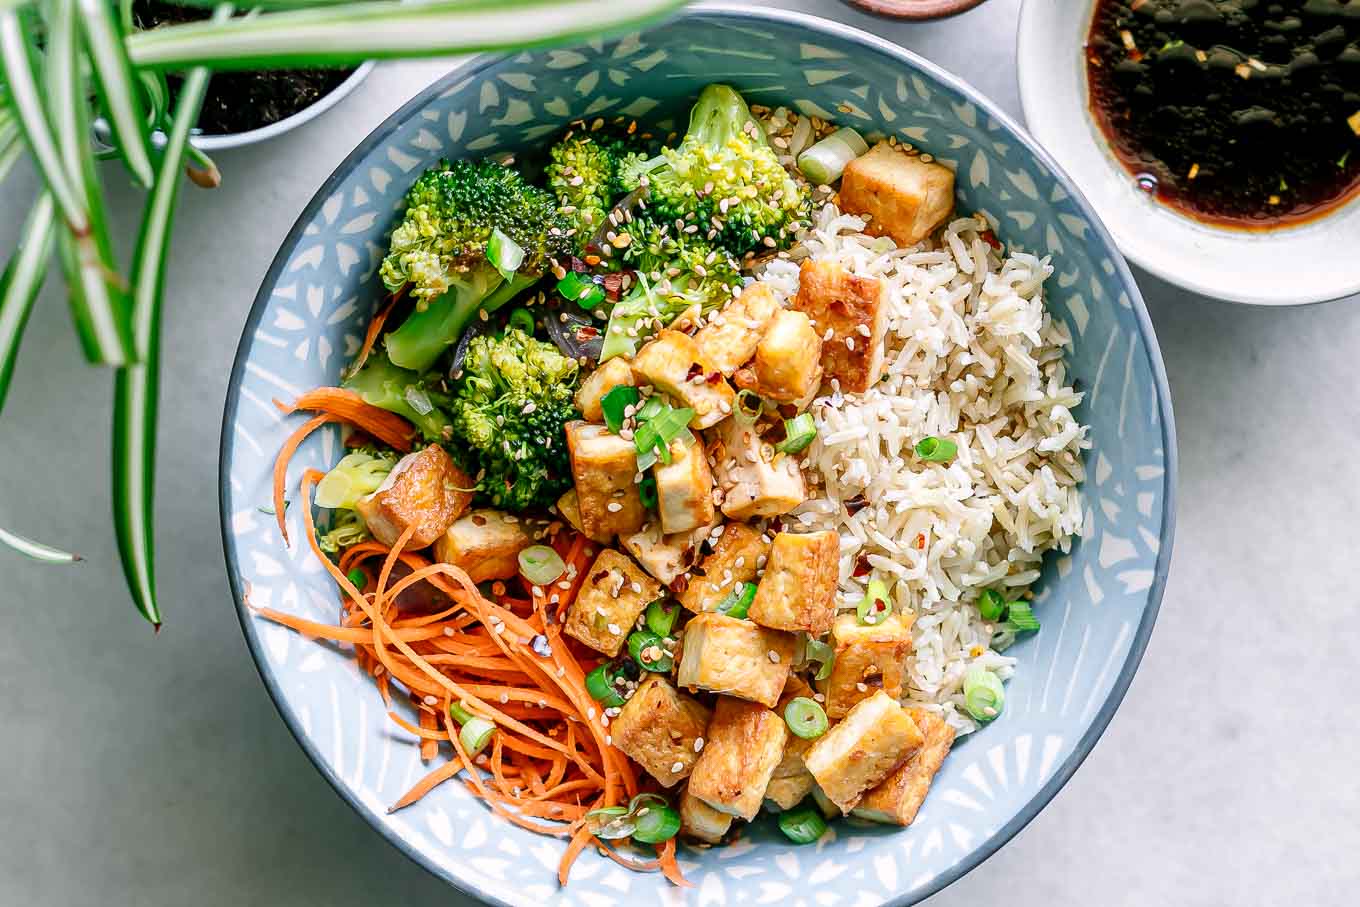 a bowl with brown rice, tofu, broccoli, carrots, and onions